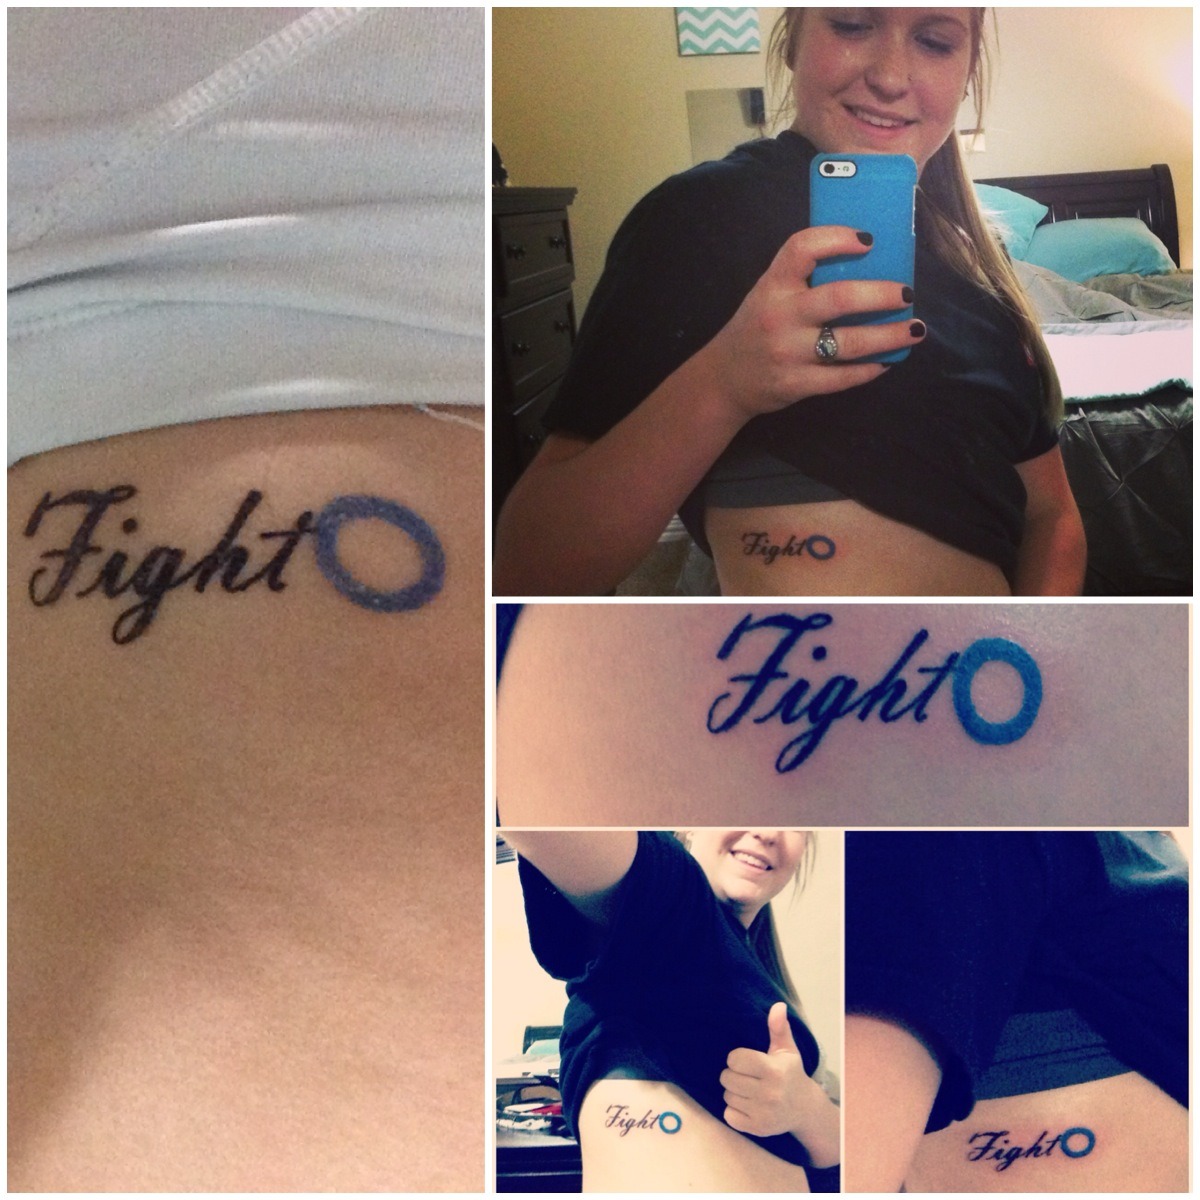 Rachel Erin’s diabetic ink. Rachel was diagnosed 13 years ago as a child.
“‘Fight’ is a constant reminder to keep battling and a representation of the things I’ve battled and overcome the past couple of year with my Diabetes.
Please reblog to spread...